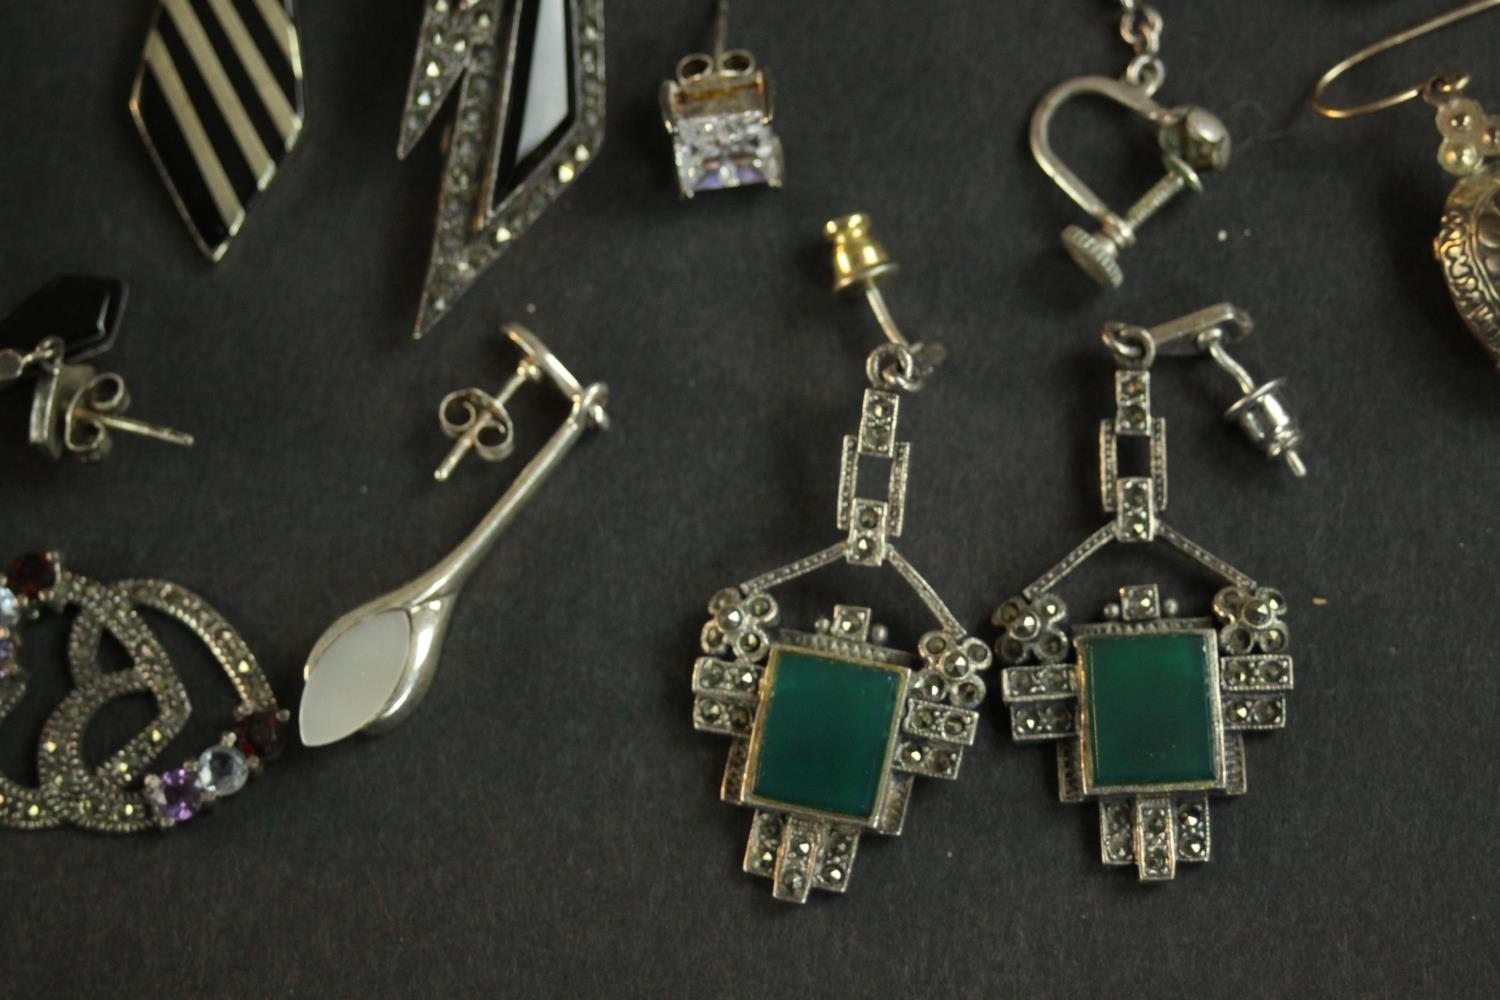 A large collection of silver and gemset jewellery, including amethyst and silver earrings, a pair of - Image 3 of 8